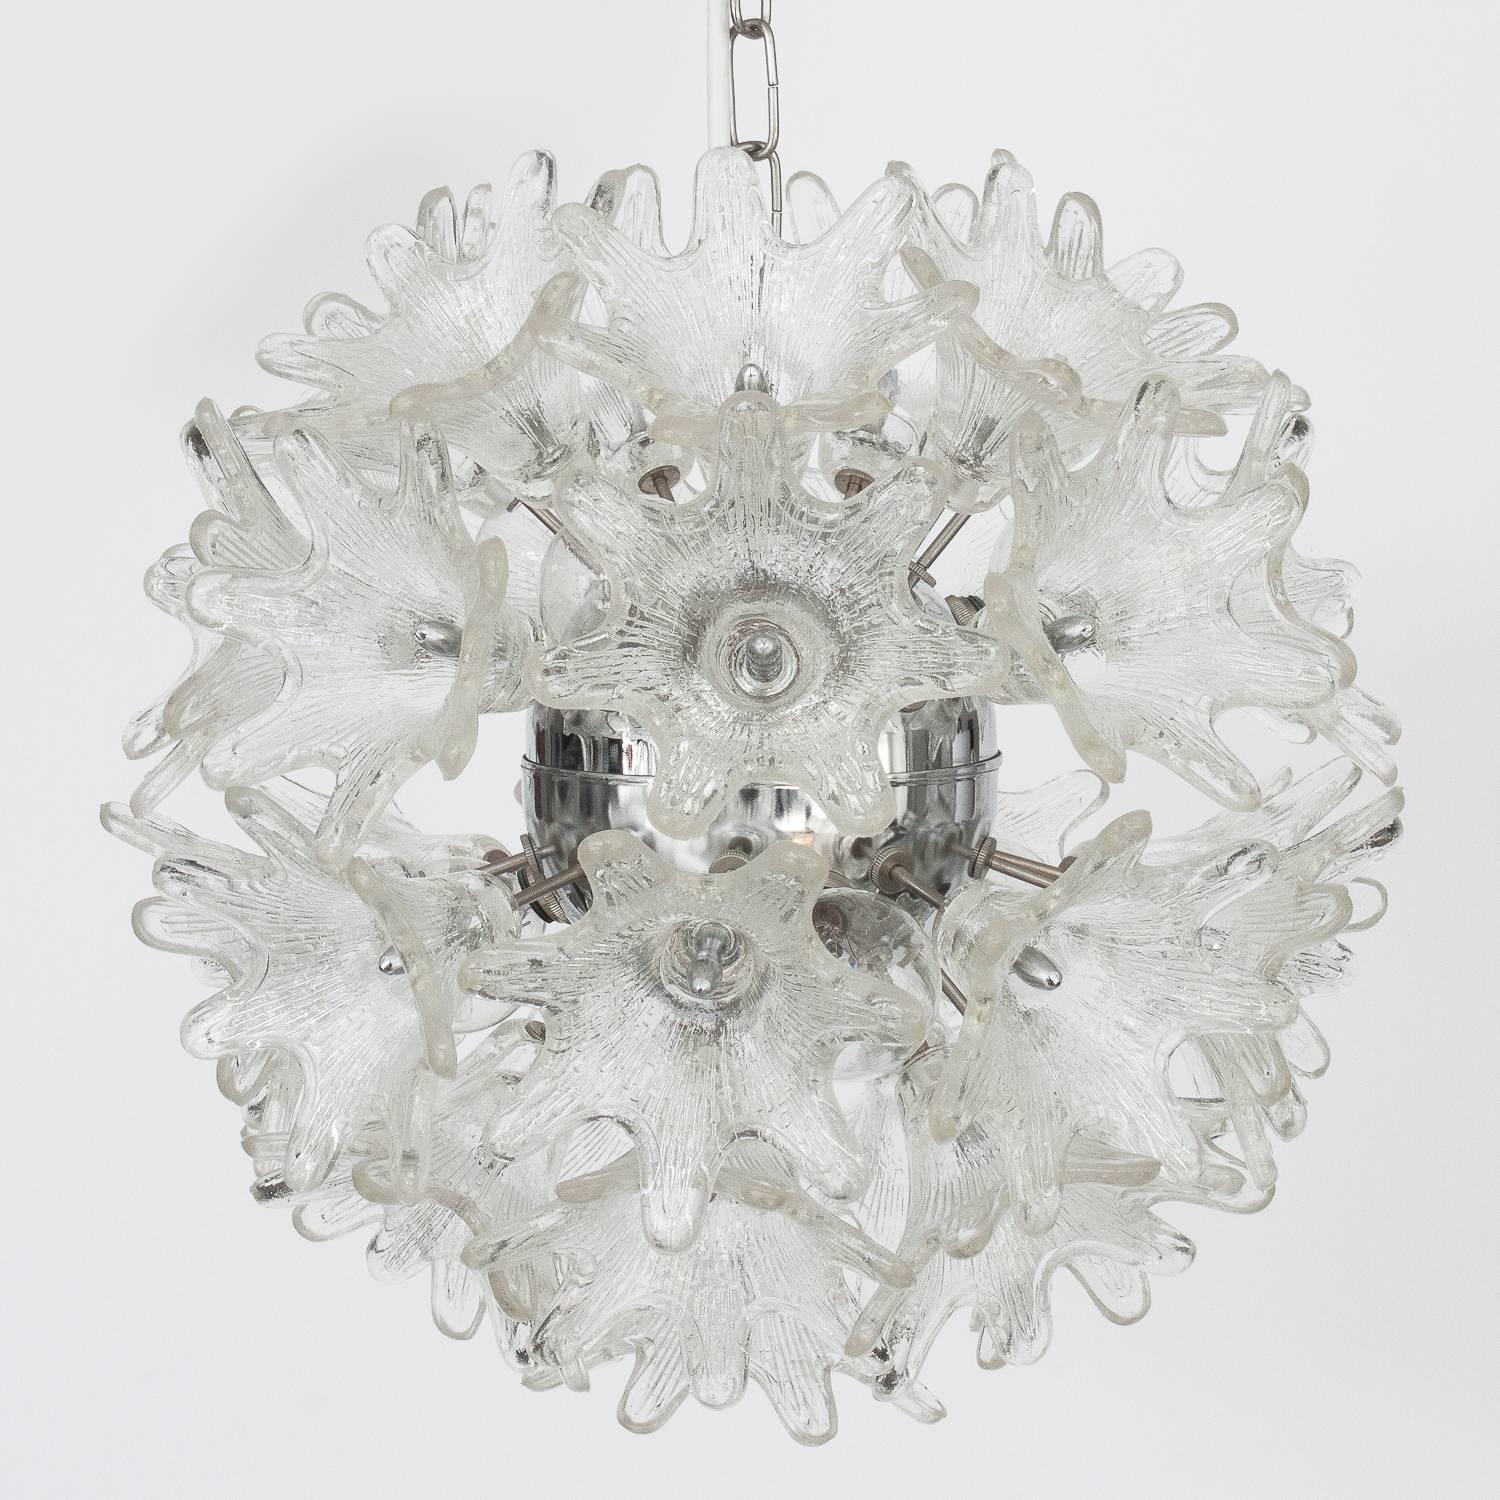 This Italian floral sputnik pendant chandelier features 33 textured Murano glass flowers on each example radiating from a central chrome hub. Each fixture takes six candelabra base light bulbs. Chrome chain and 5" diameter chrome canopy for